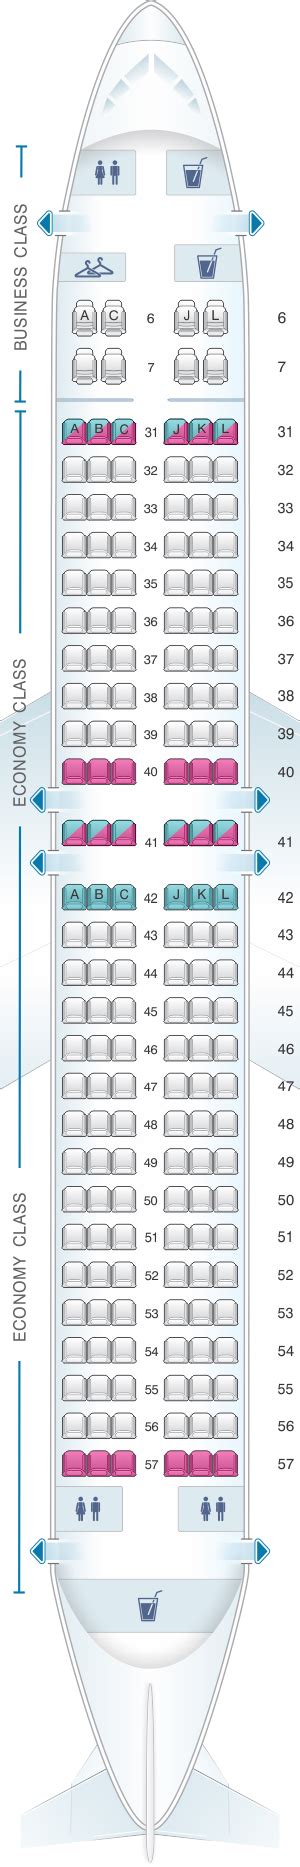 Seat Map China Eastern Airlines Boeing B737 800 170pax Seatmaestro